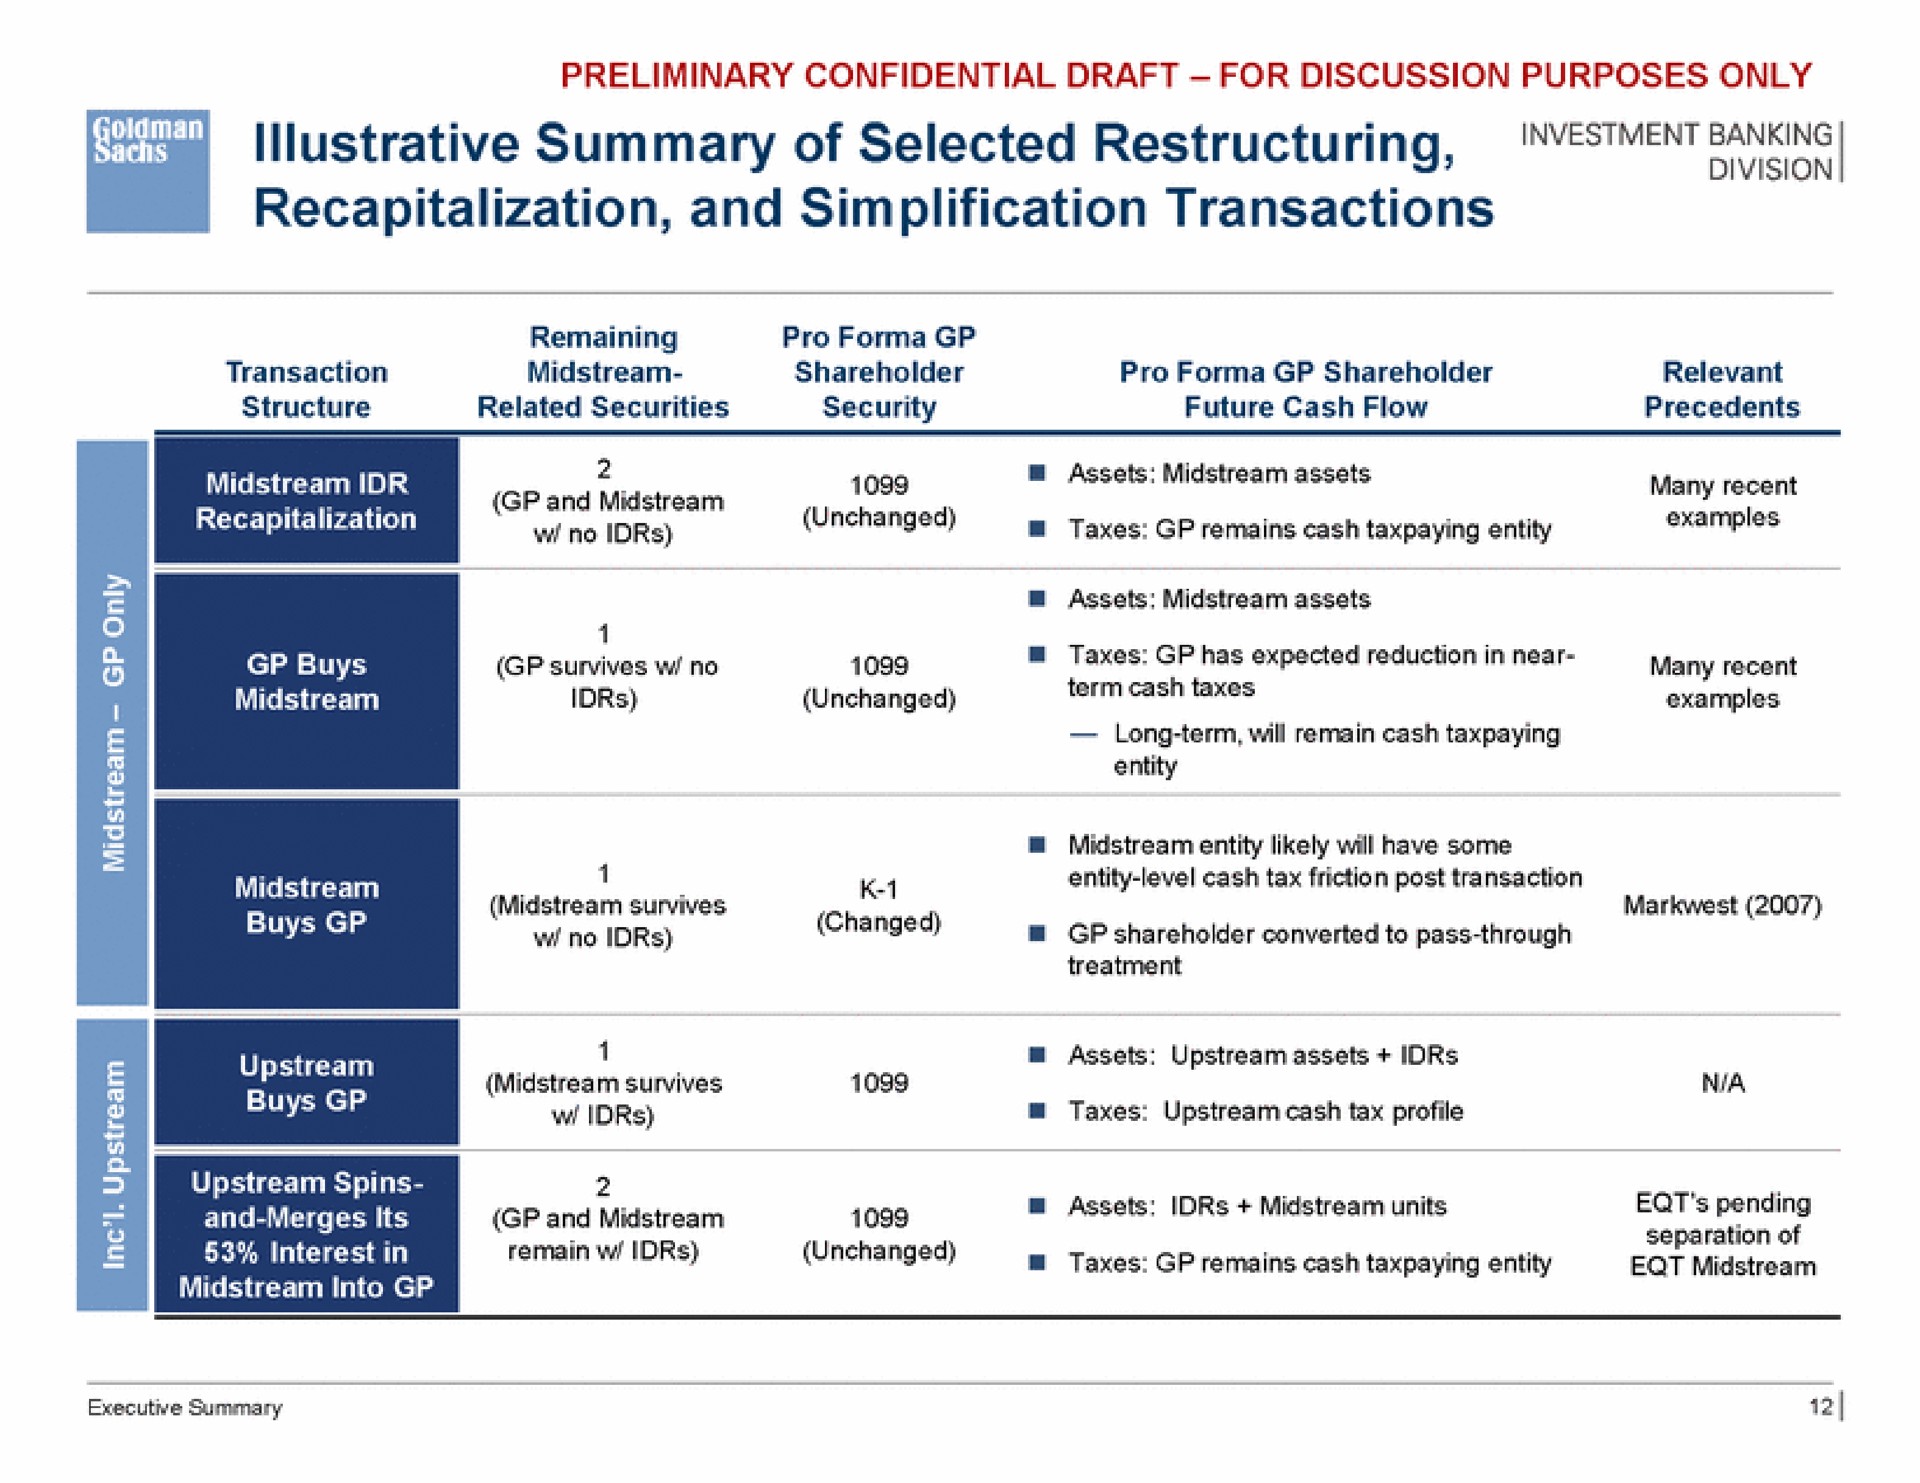 secs illustrative summary of selected recapitalization and simplification transactions rie and midstream recent | Goldman Sachs